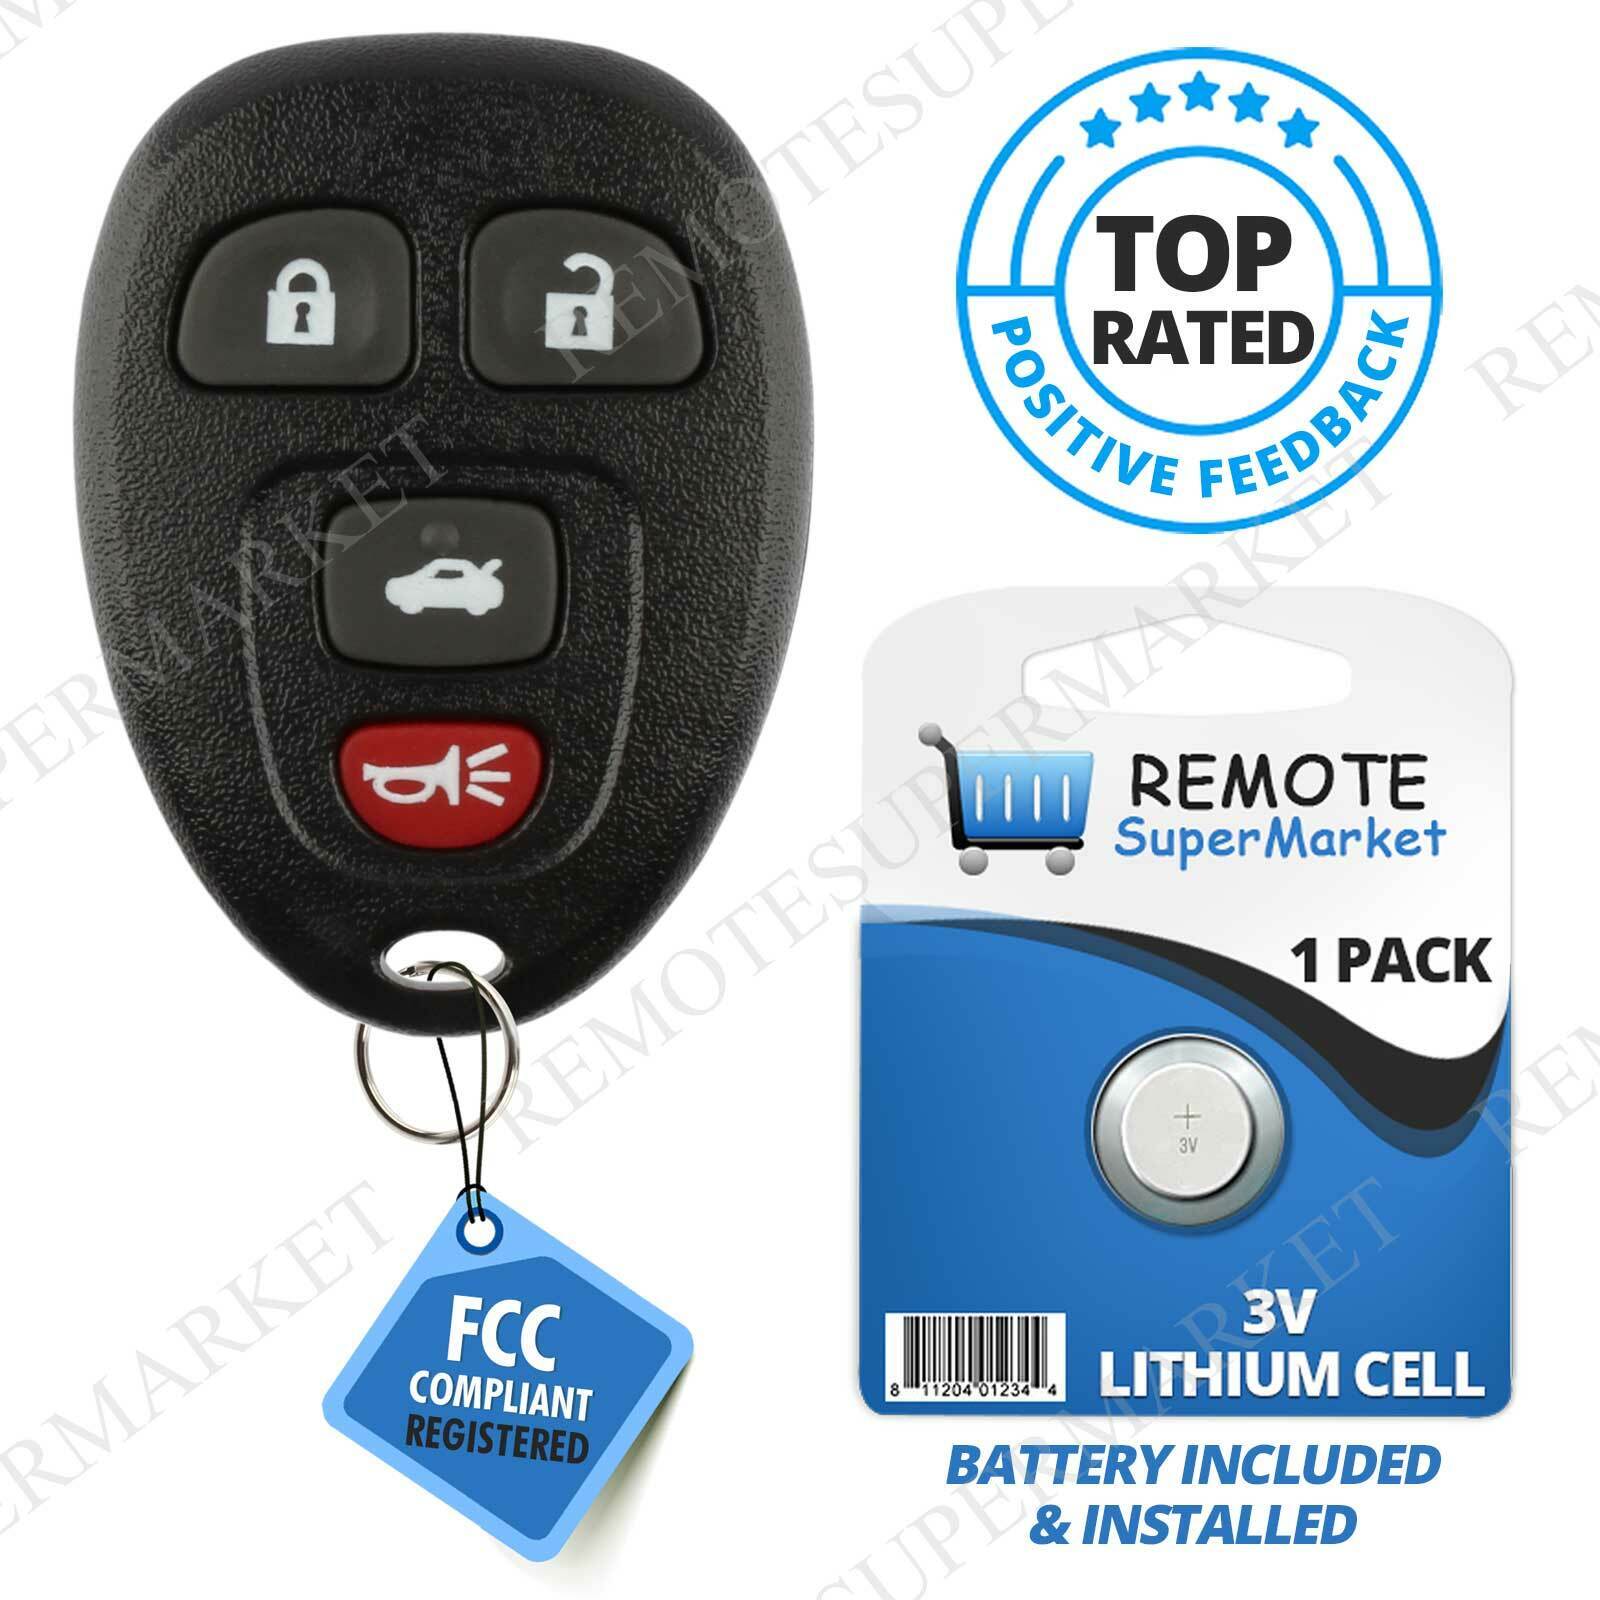 Replacement for 2006-2013 Chevy Impala 06-07 Monte Carlo Remote Car Key Fob 4b